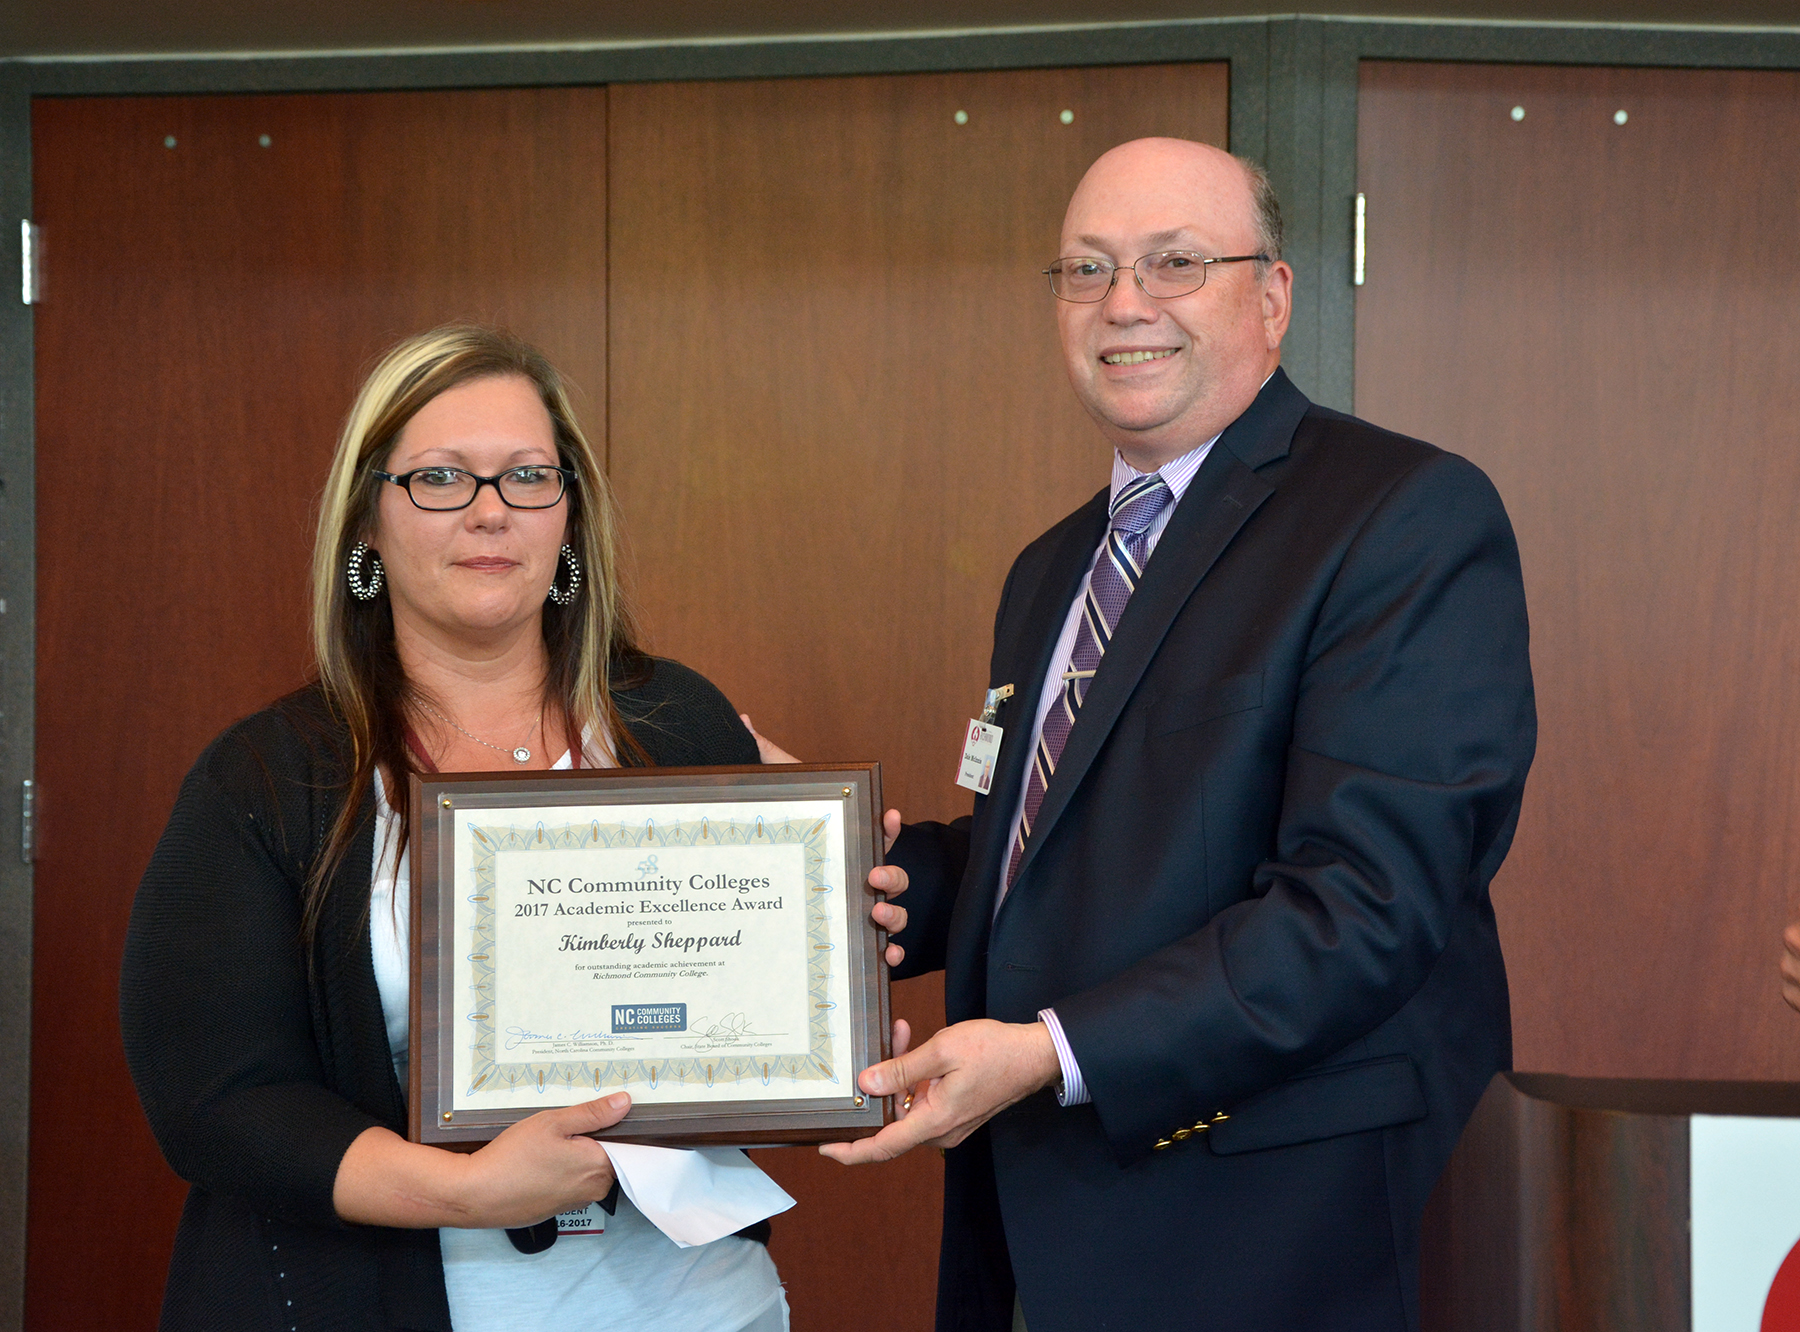 Kimberly Sheppard accepts an award from Dr. Dale McInnis